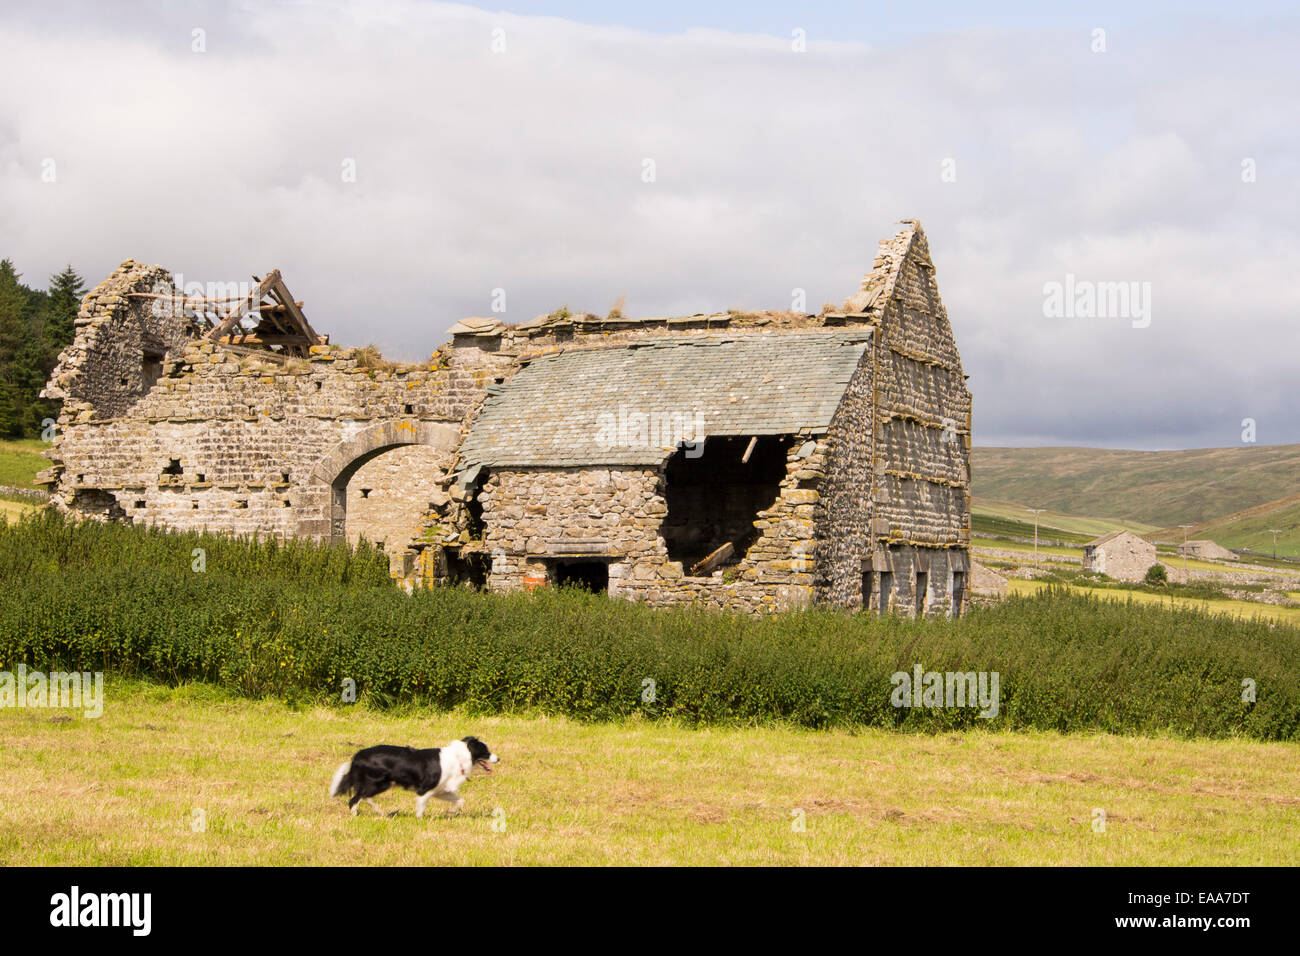 Littondale in the Yorkshire Dales with a derelict barn, UK. Stock Photo